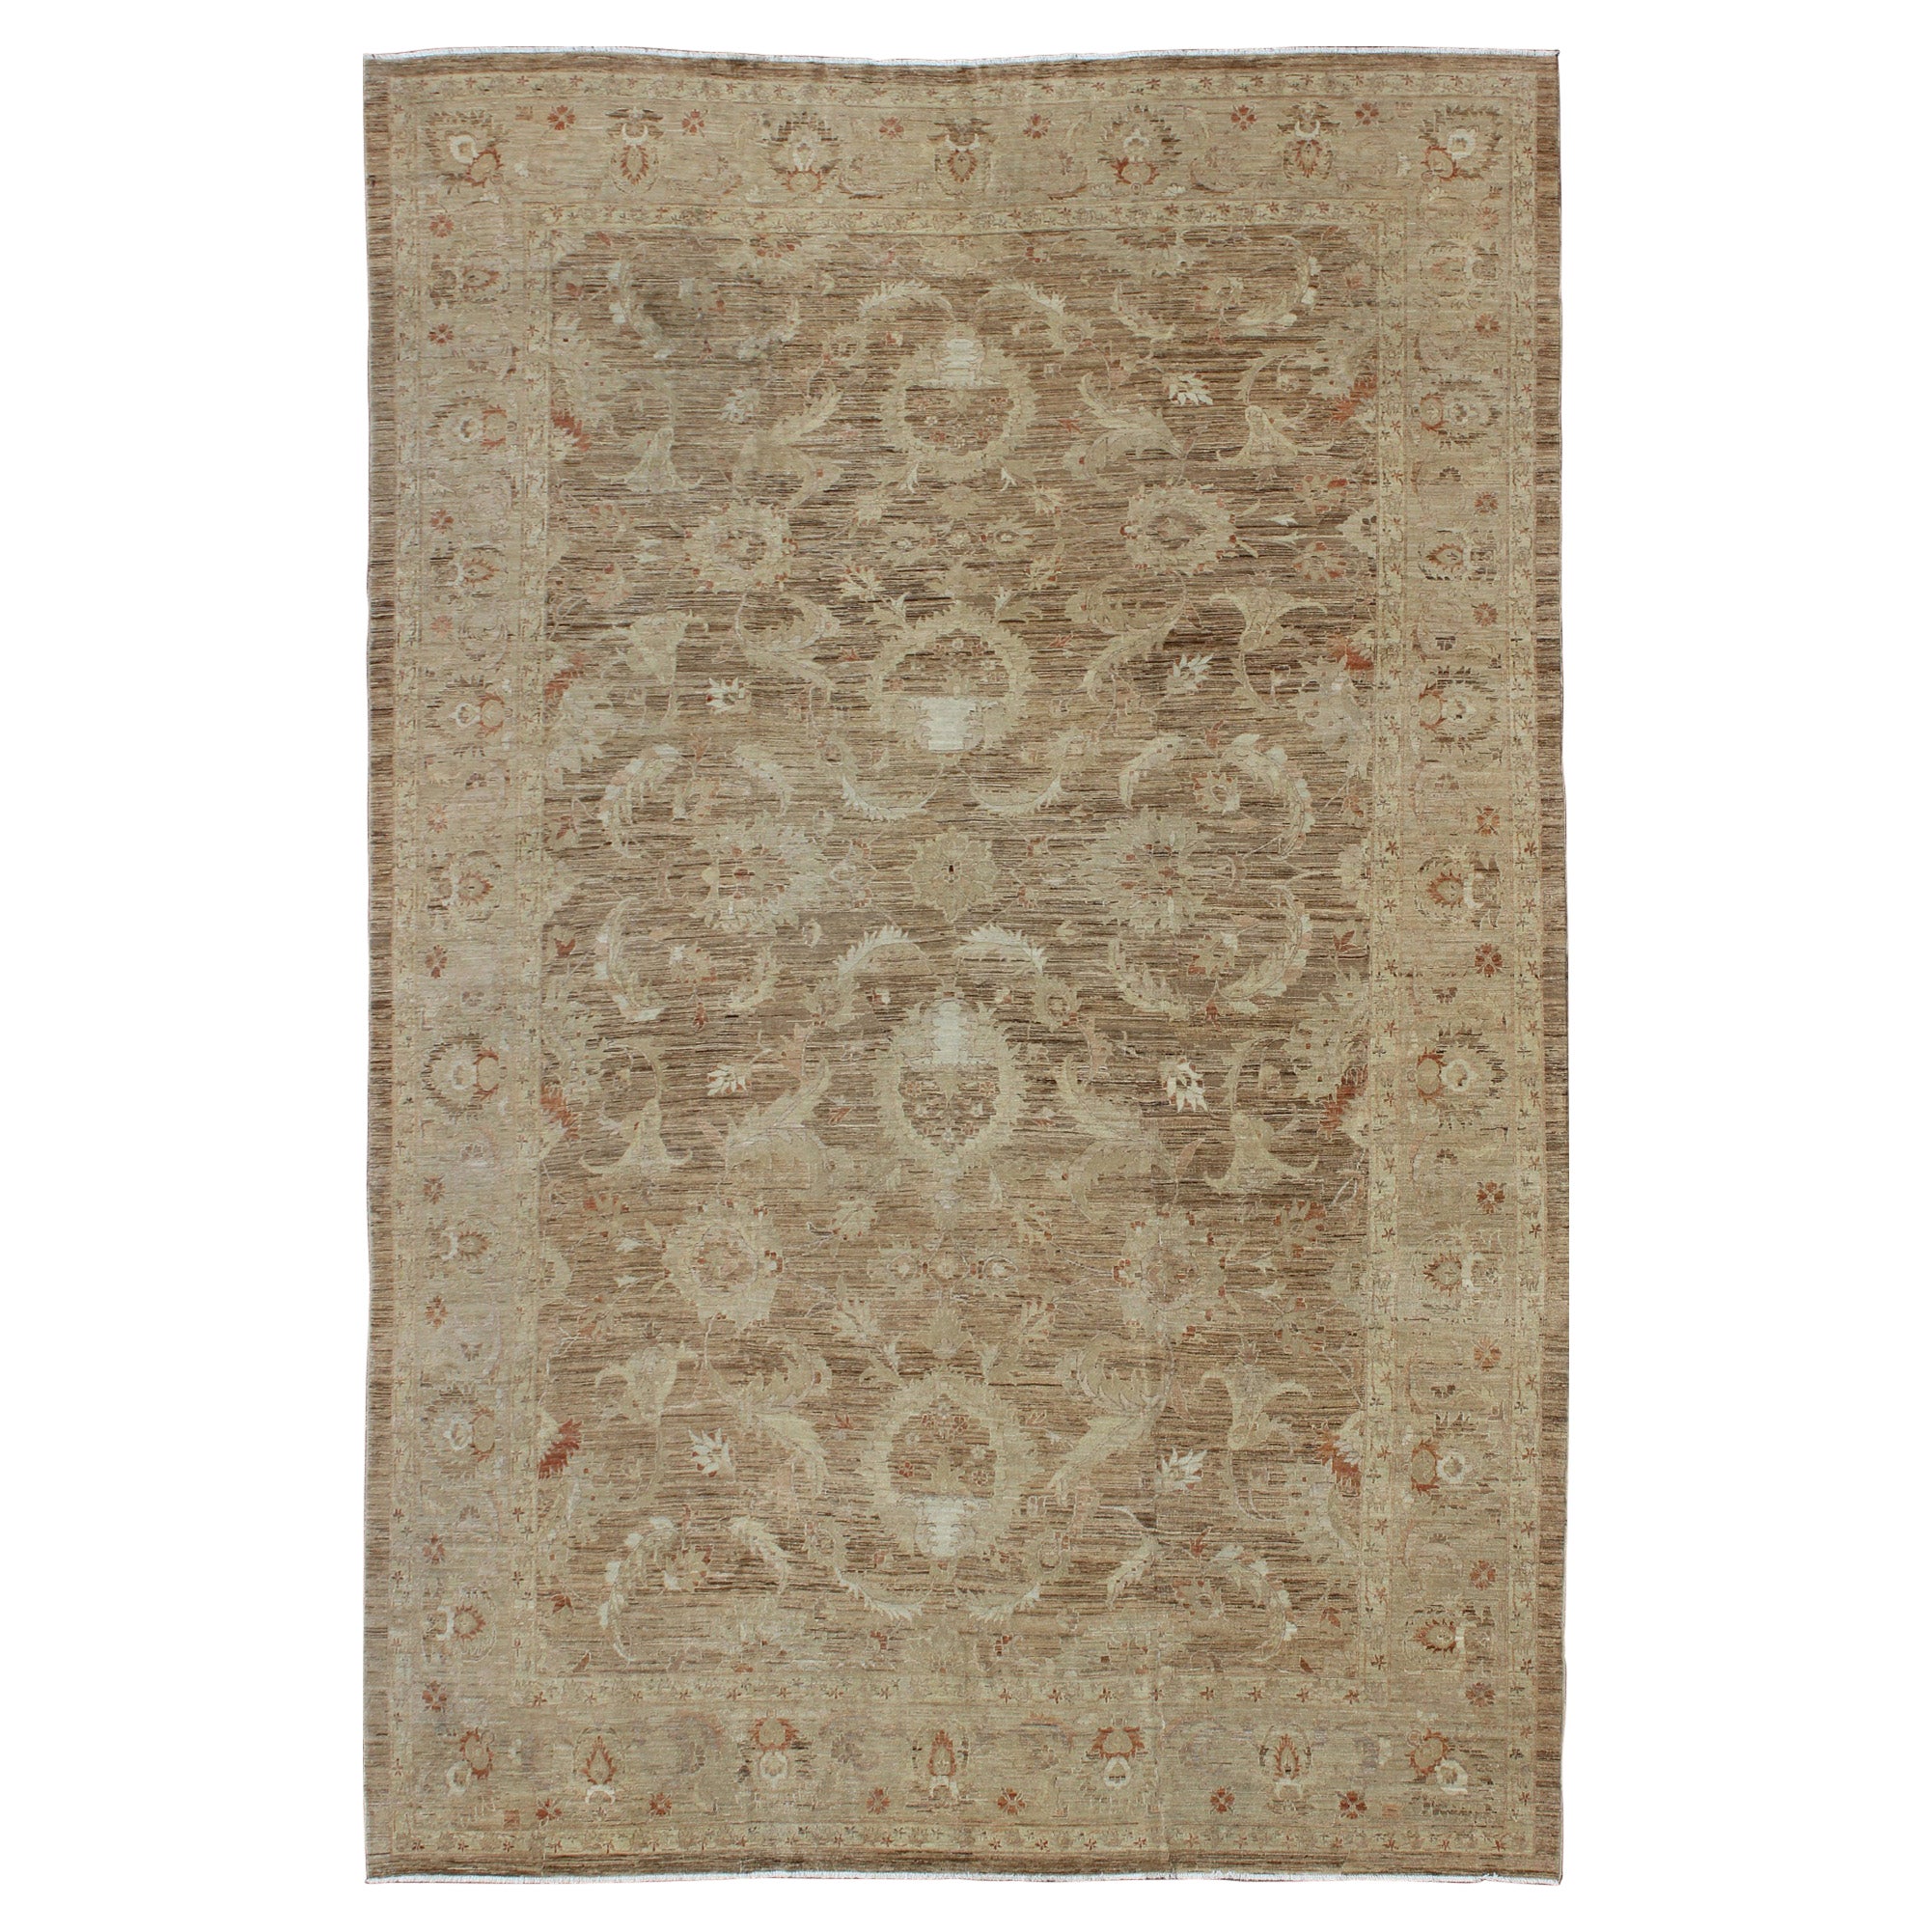 Very Large Sultanabad Pattern in Earth Tones with Light Brown Lt. Green & Taupe